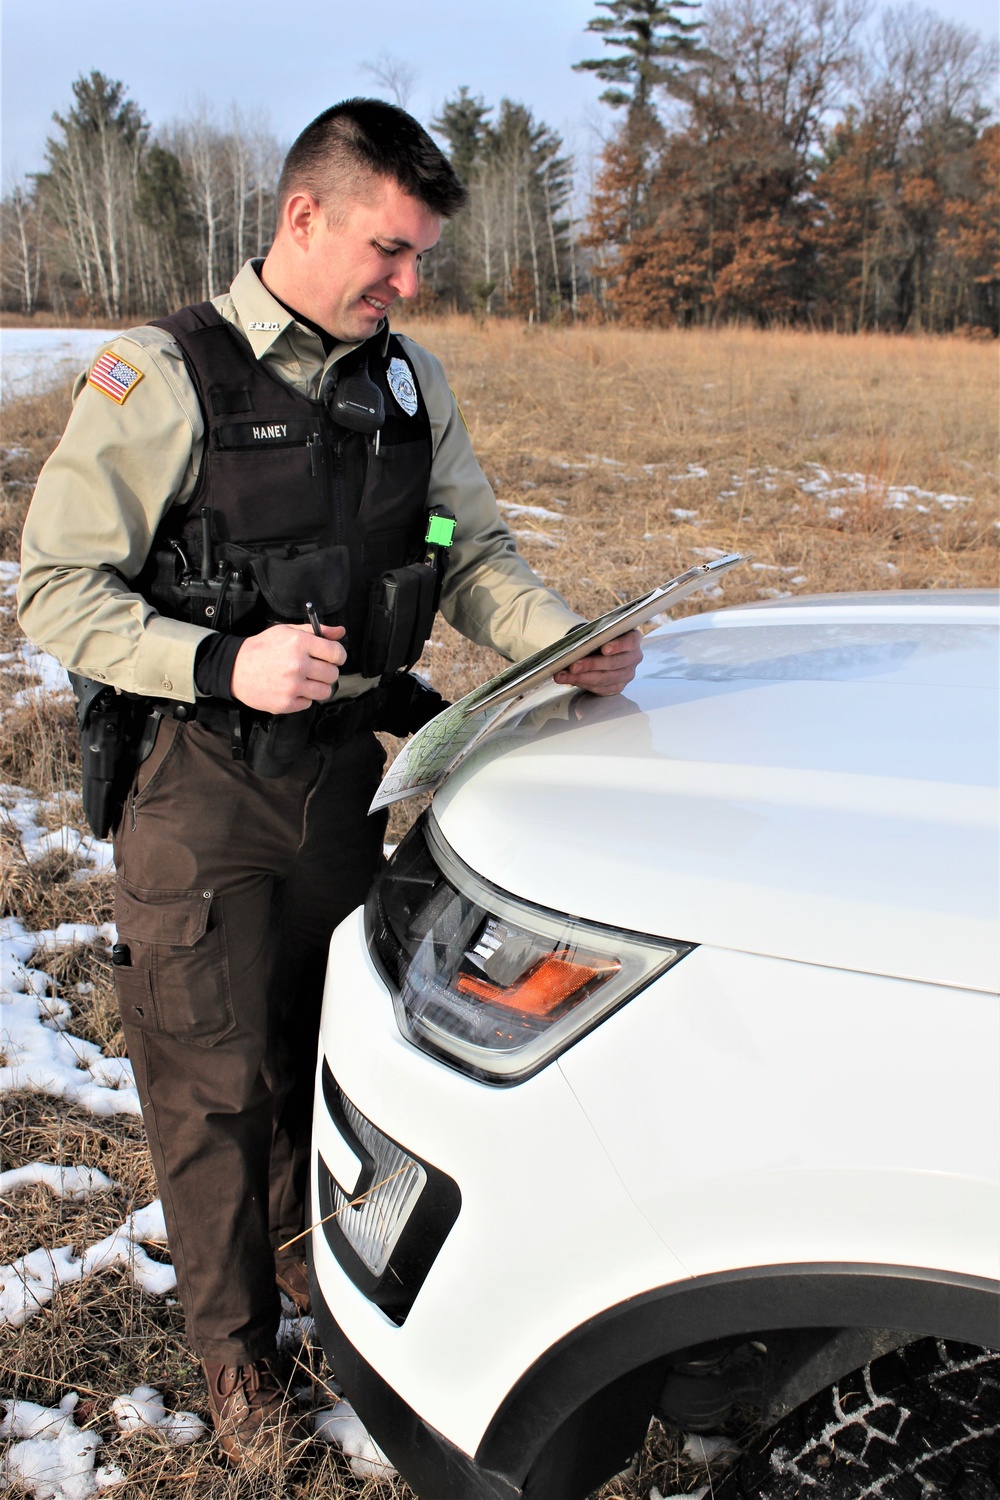 New game wardens support Fort McCoy Police Department